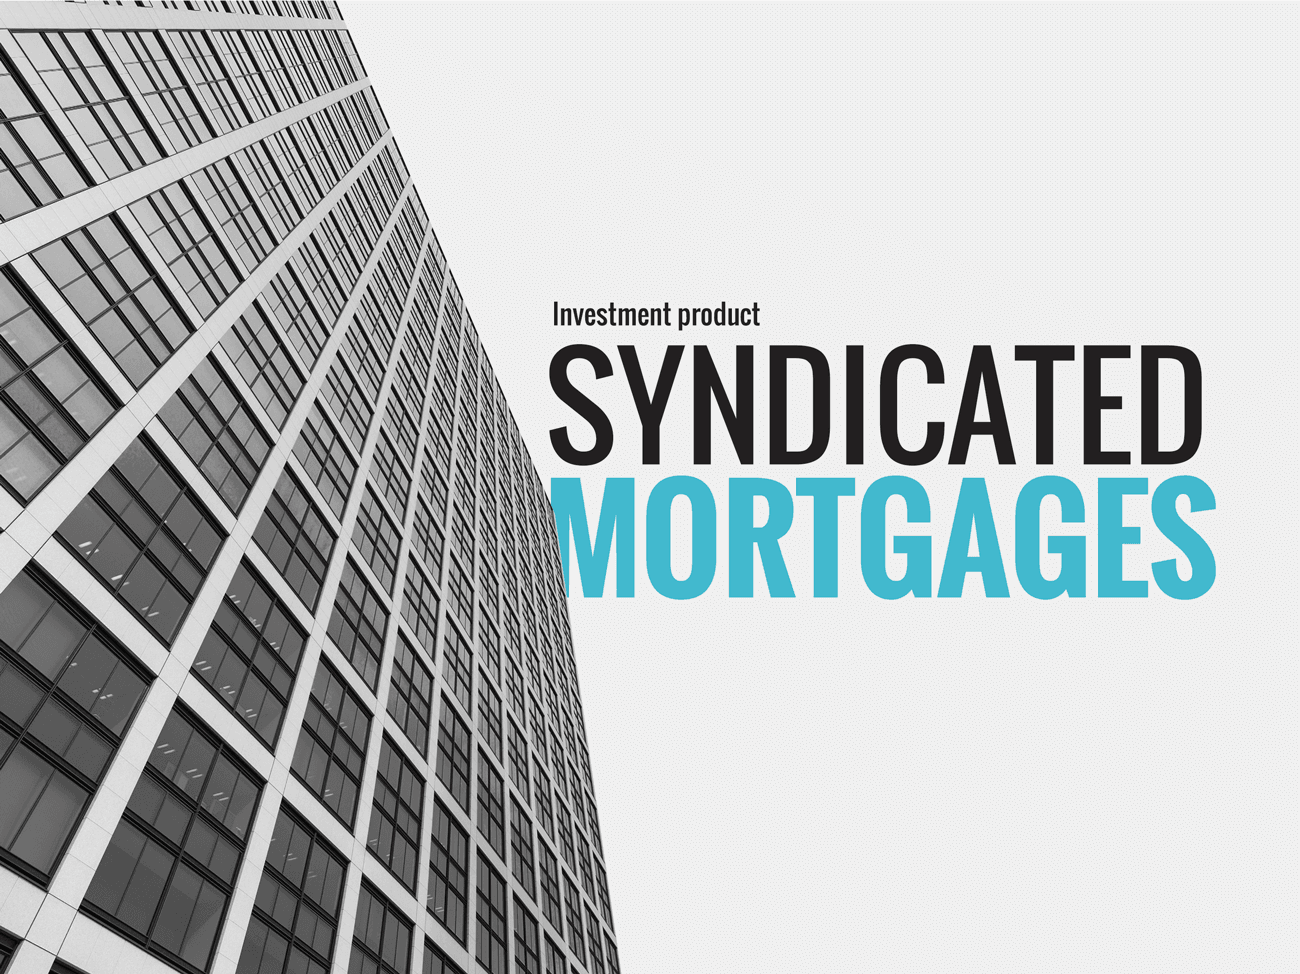 Investment product: Syndicated mortgages